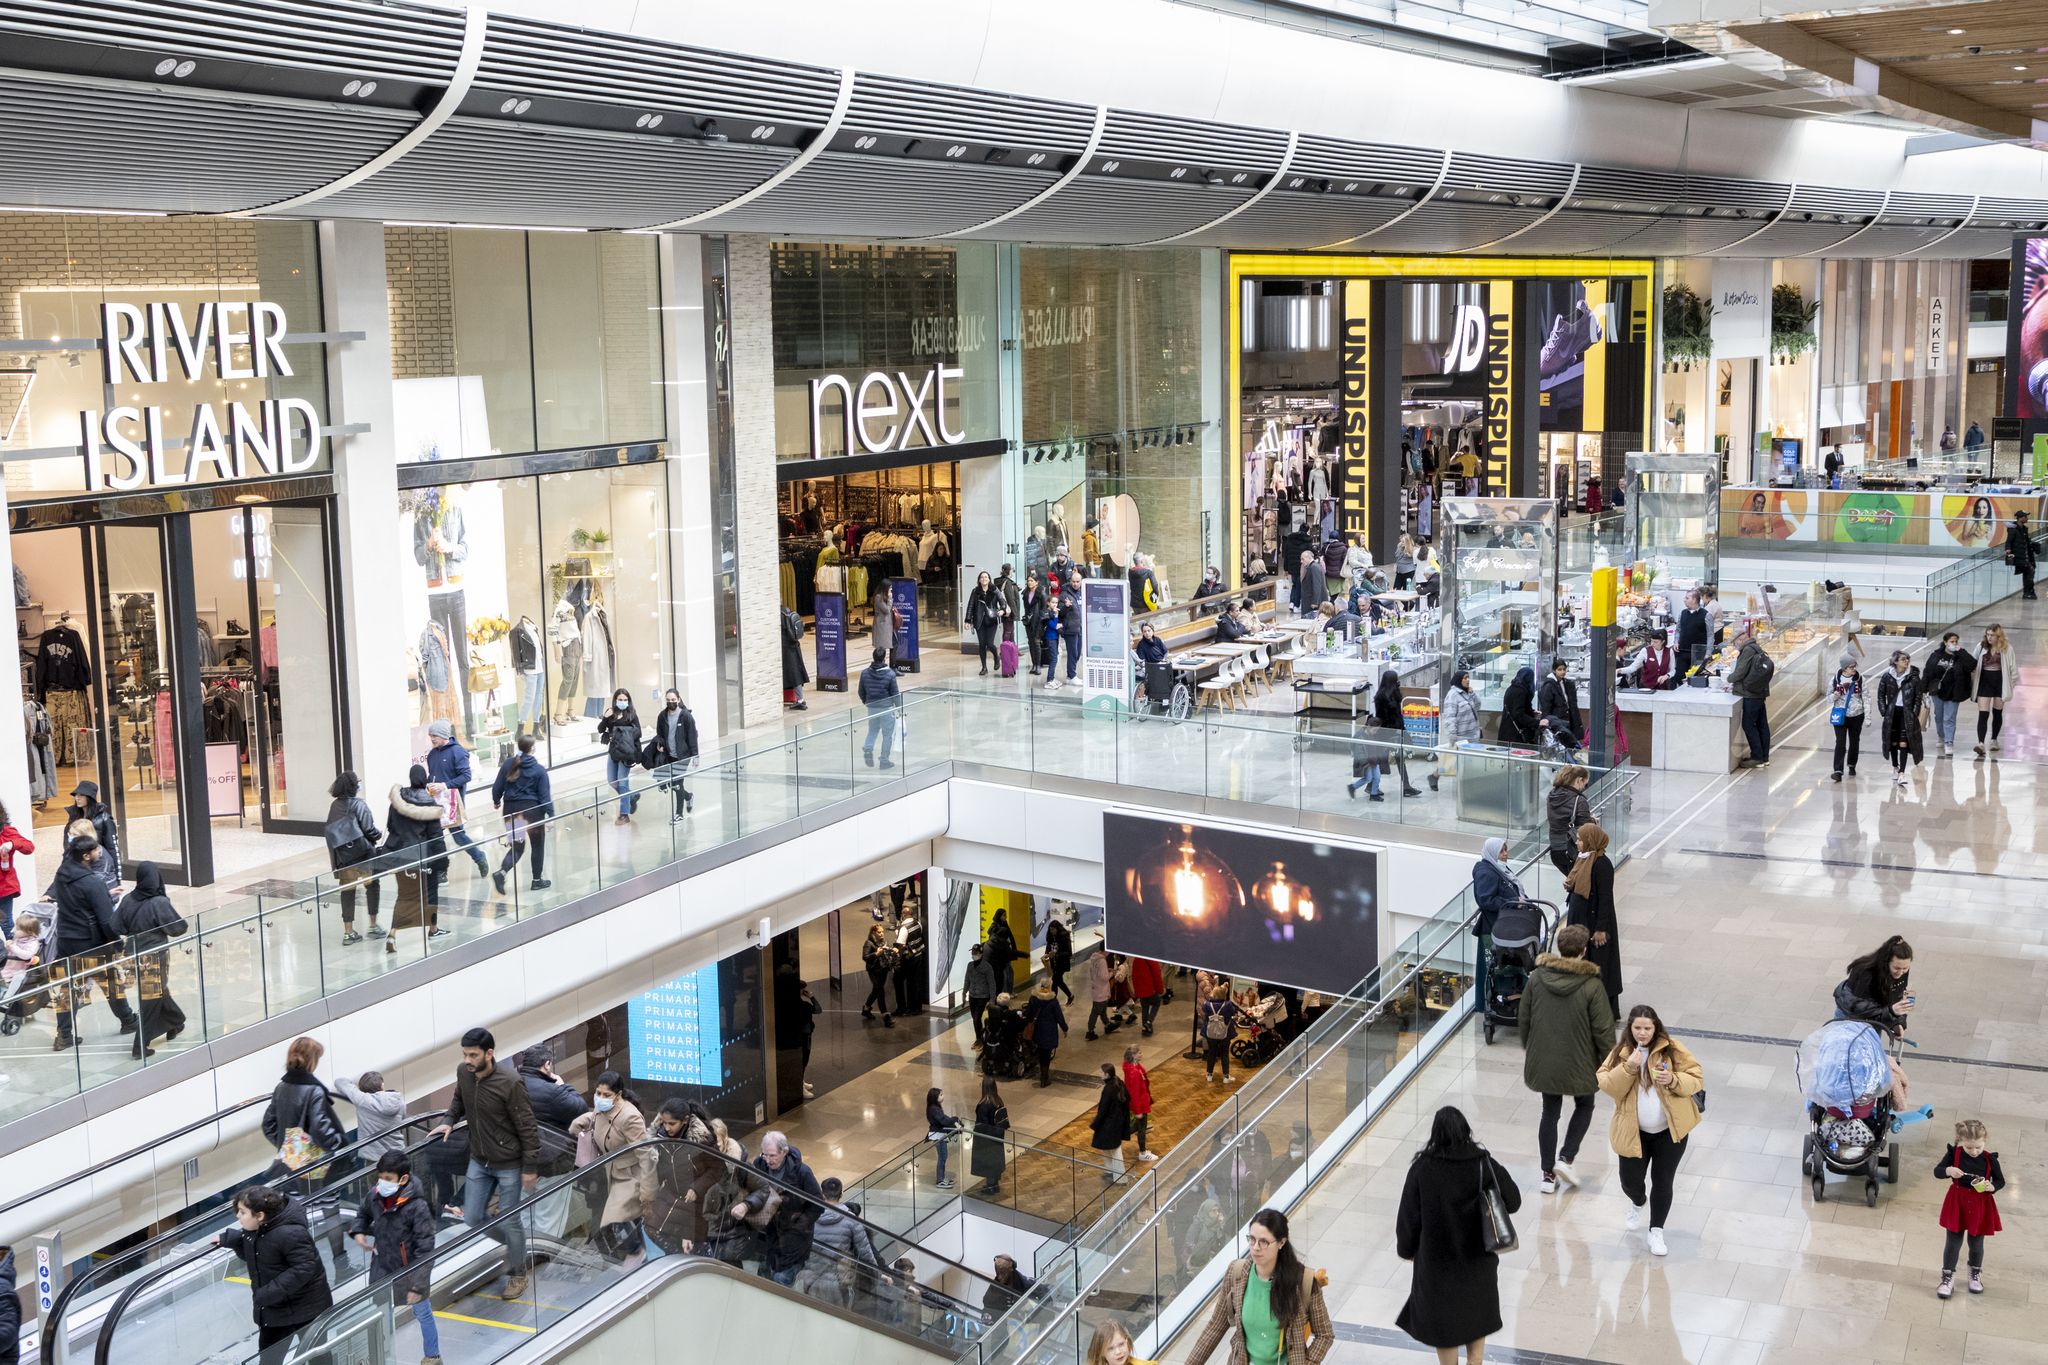 Visitor's Guide to Westfield London Shopping Centre